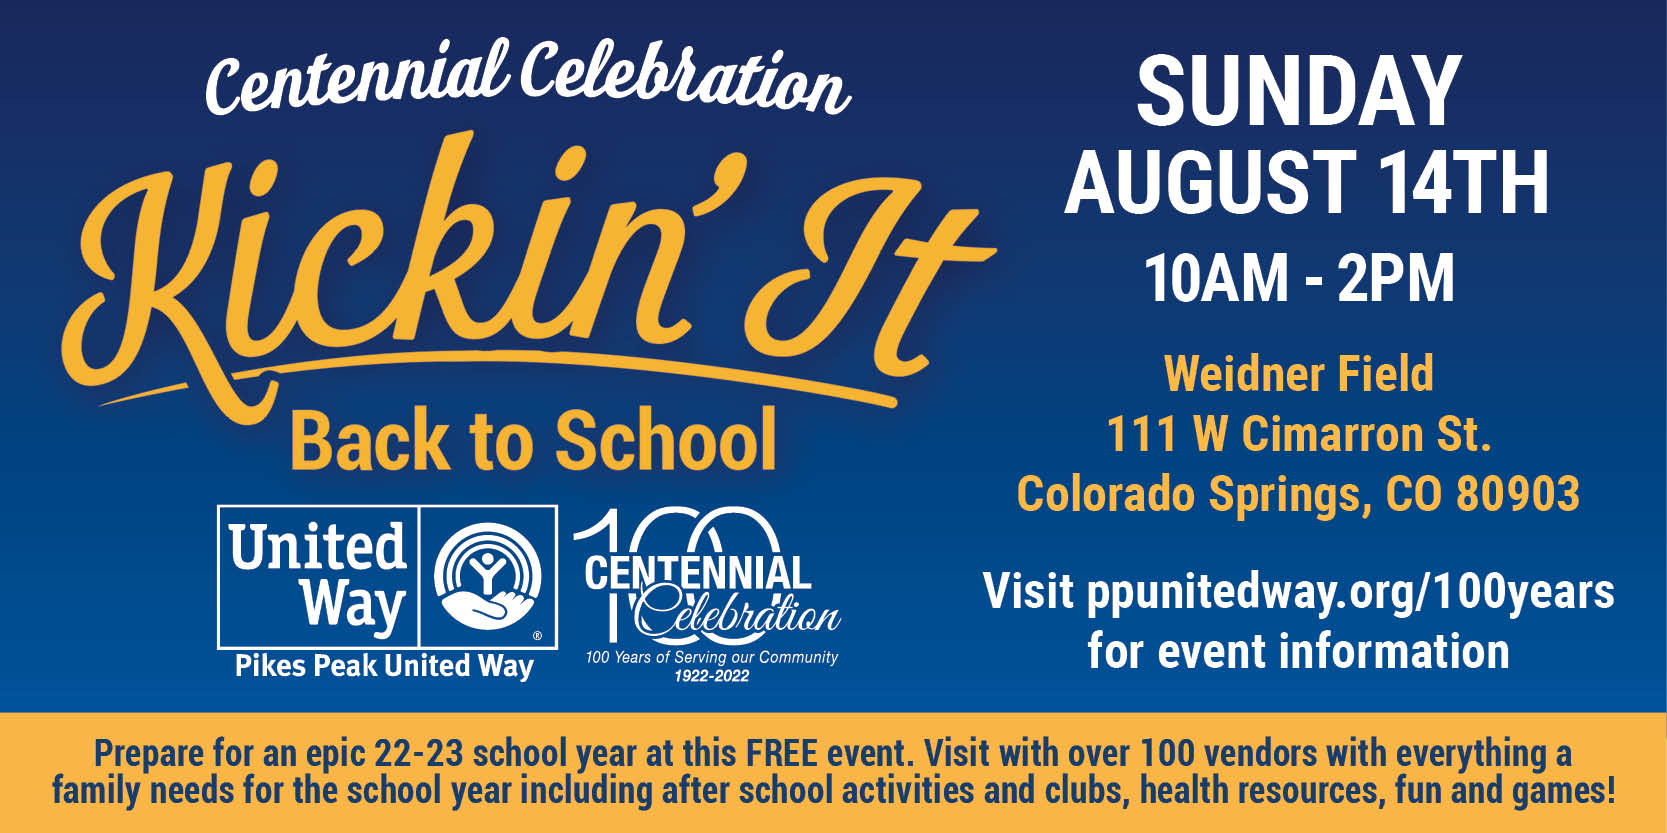 blue image with yellow text showing date of event, August 14th from 10 to 2p at Weidner Field in Colorado Springs